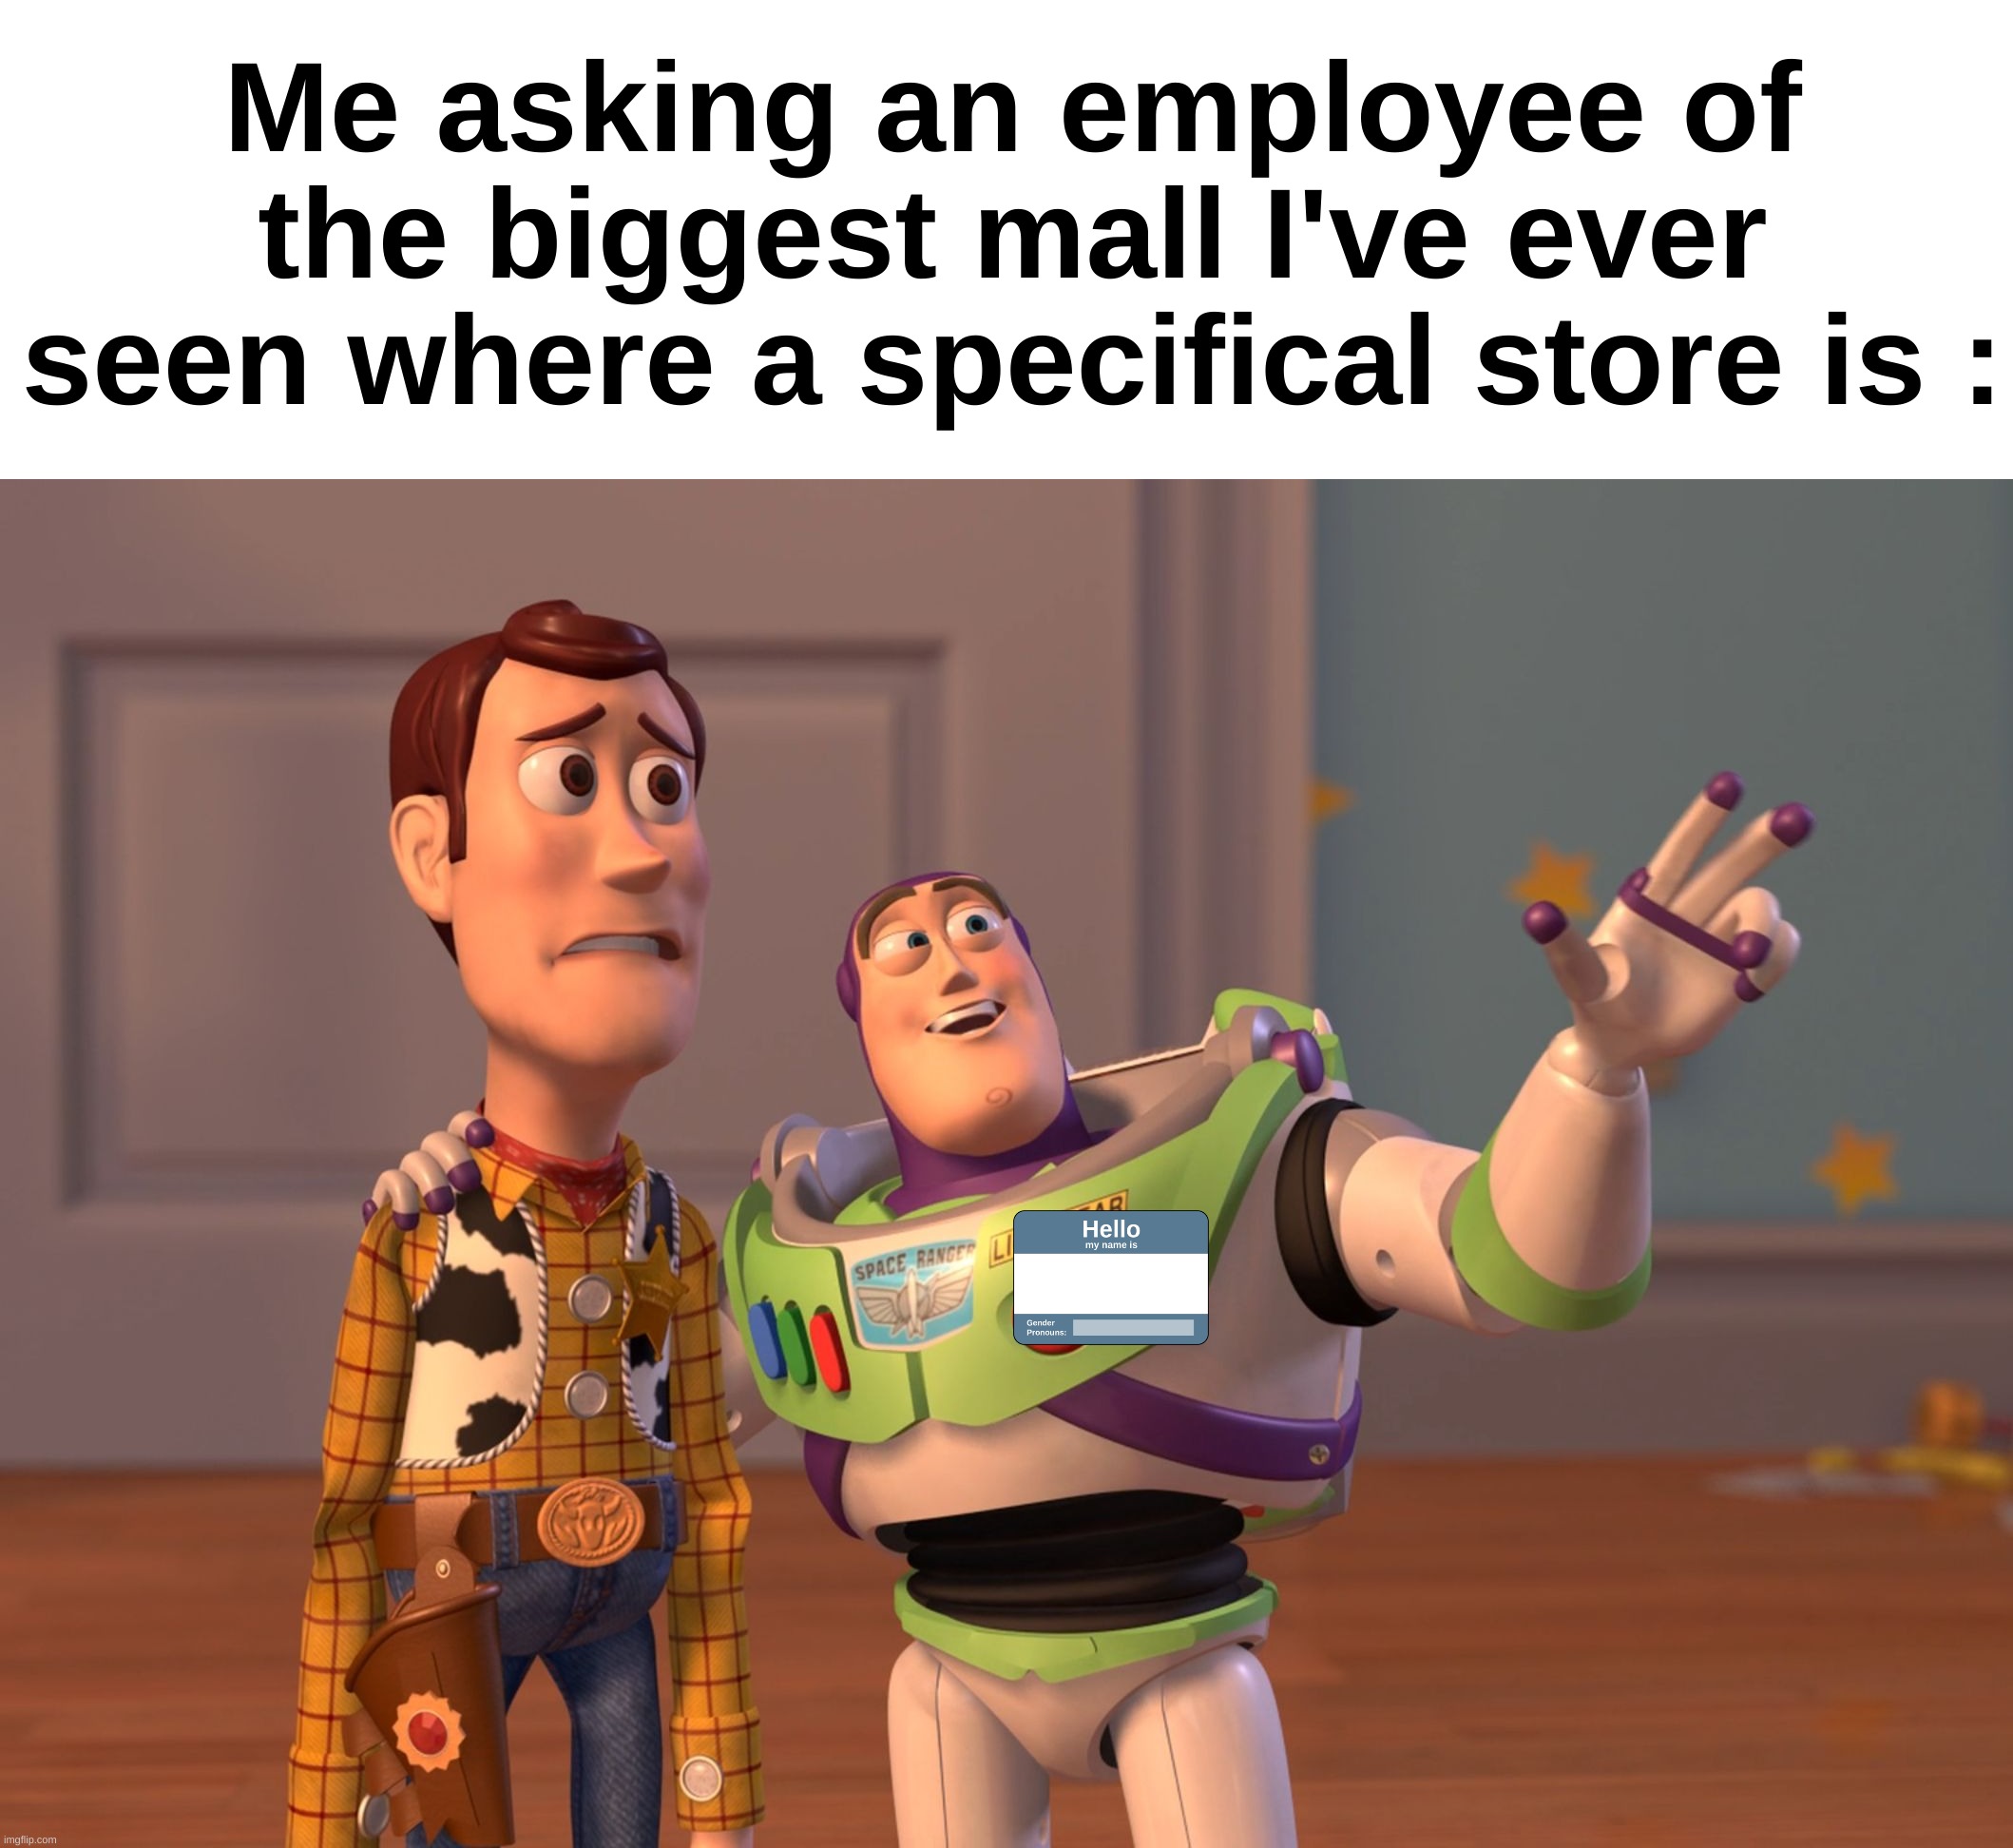 "How do they know that ?'' | Me asking an employee of the biggest mall I've ever seen where a specifical store is : | image tagged in memes,funny,relatable,malls,employees,front page plz | made w/ Imgflip meme maker